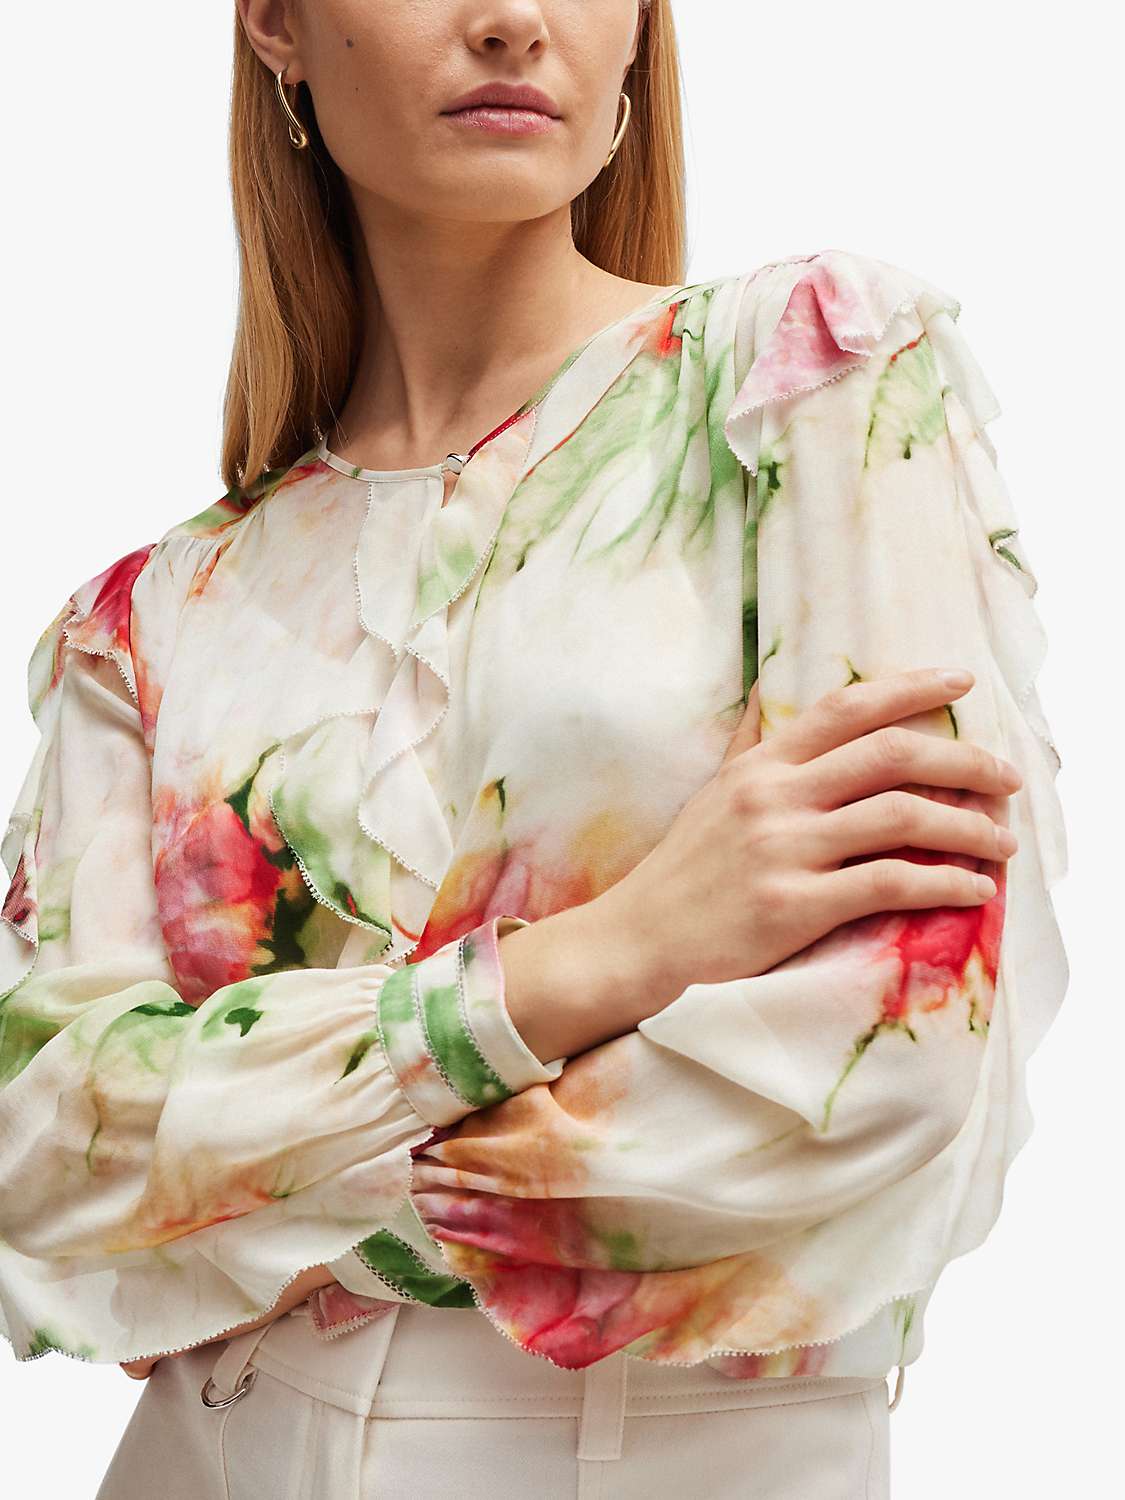 Buy BOSS Bacrina Abstract Print Frill Sleeve Blouse, Multi Online at johnlewis.com